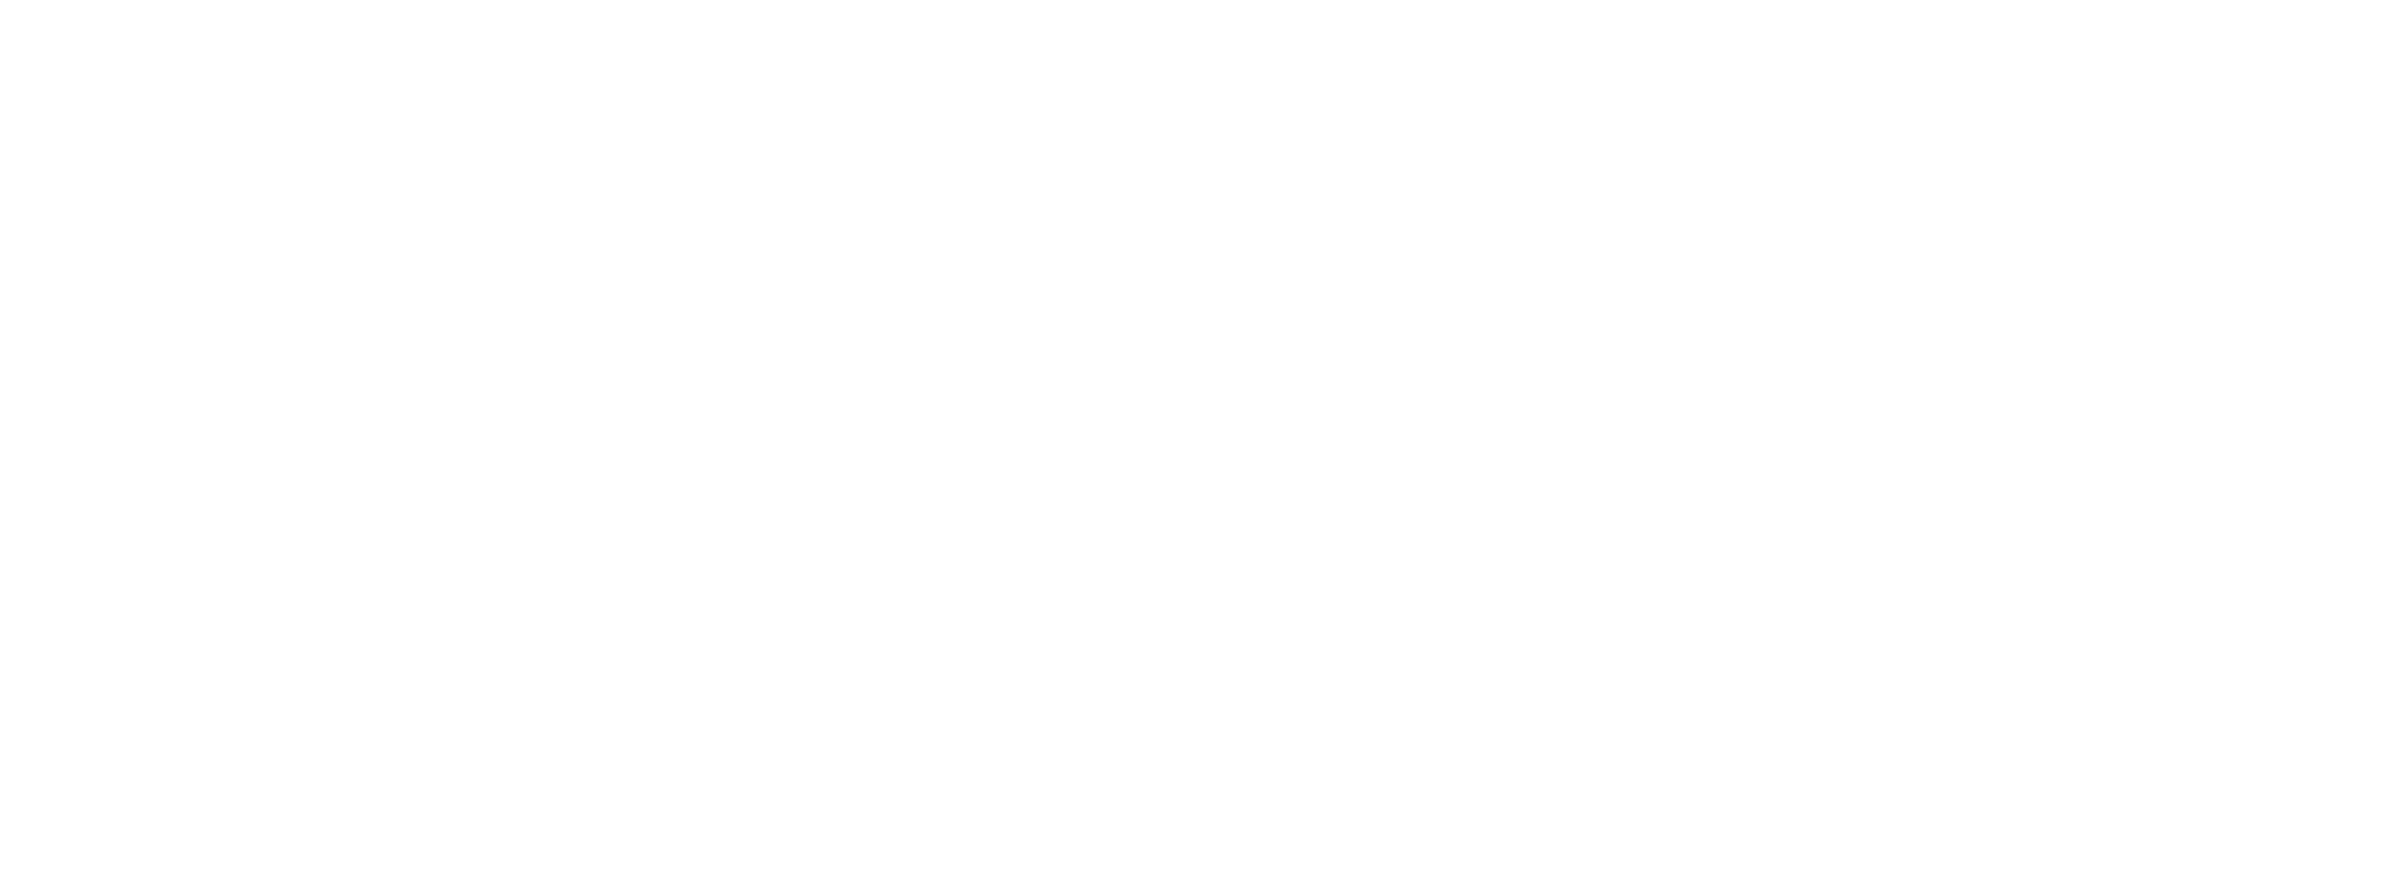 https://www.thepsychedelicassembly.com/wp-content/uploads/2024/01/forbes-logo-black-and-white.png